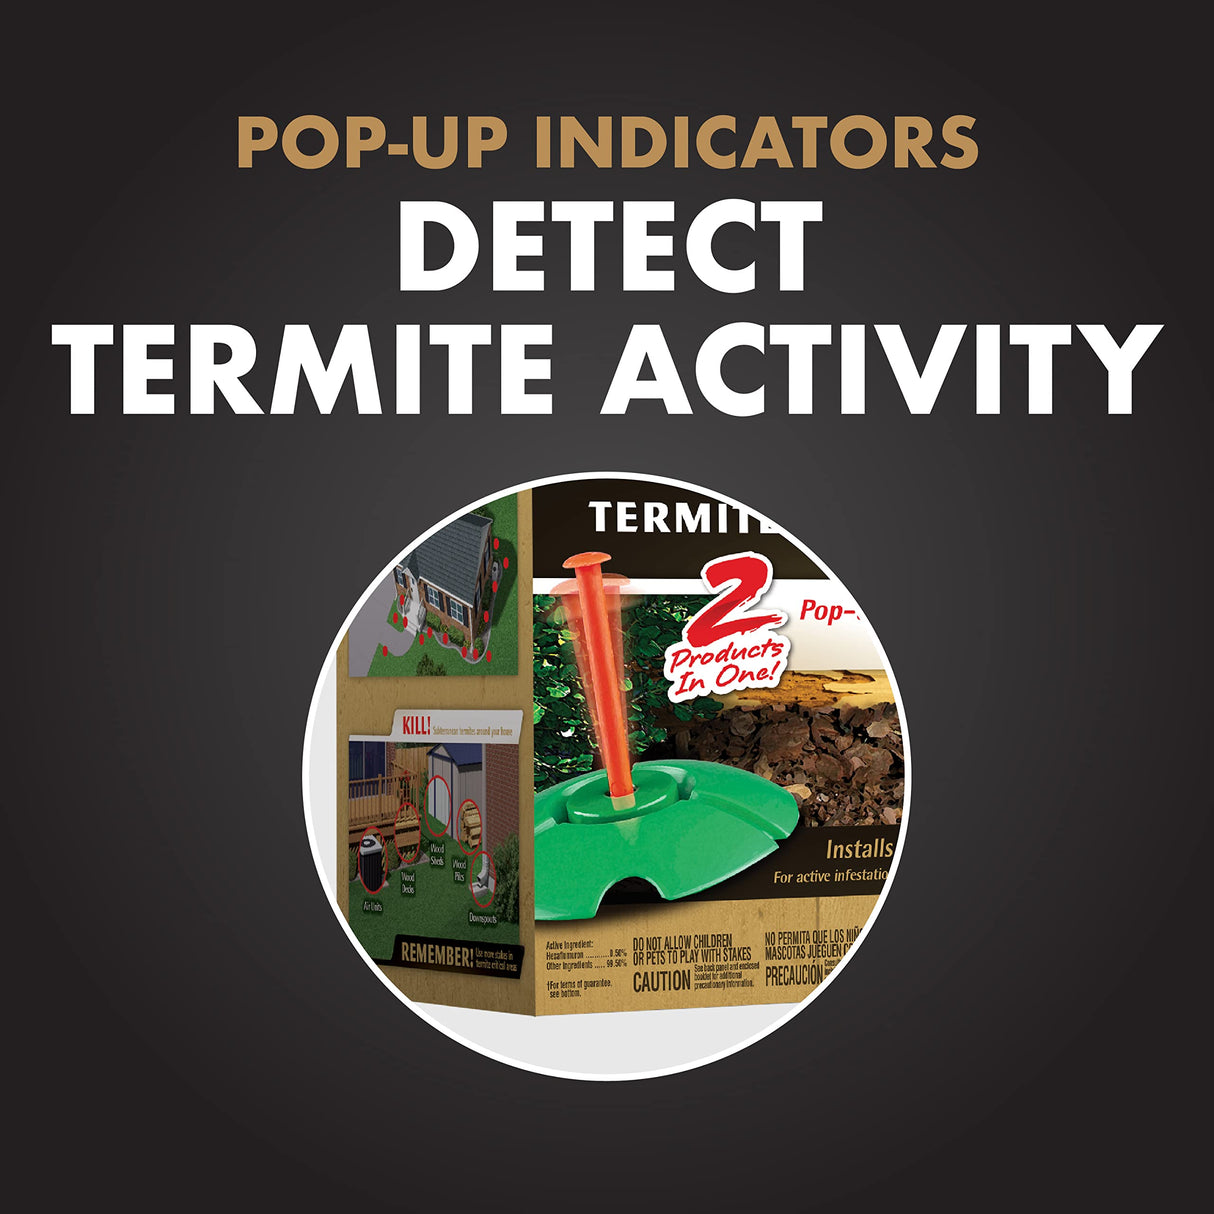 Spectracide Terminate Termite Detection & Killing Stakes, Kills Foraging Termites, Detects Termite Activity, 15 Count